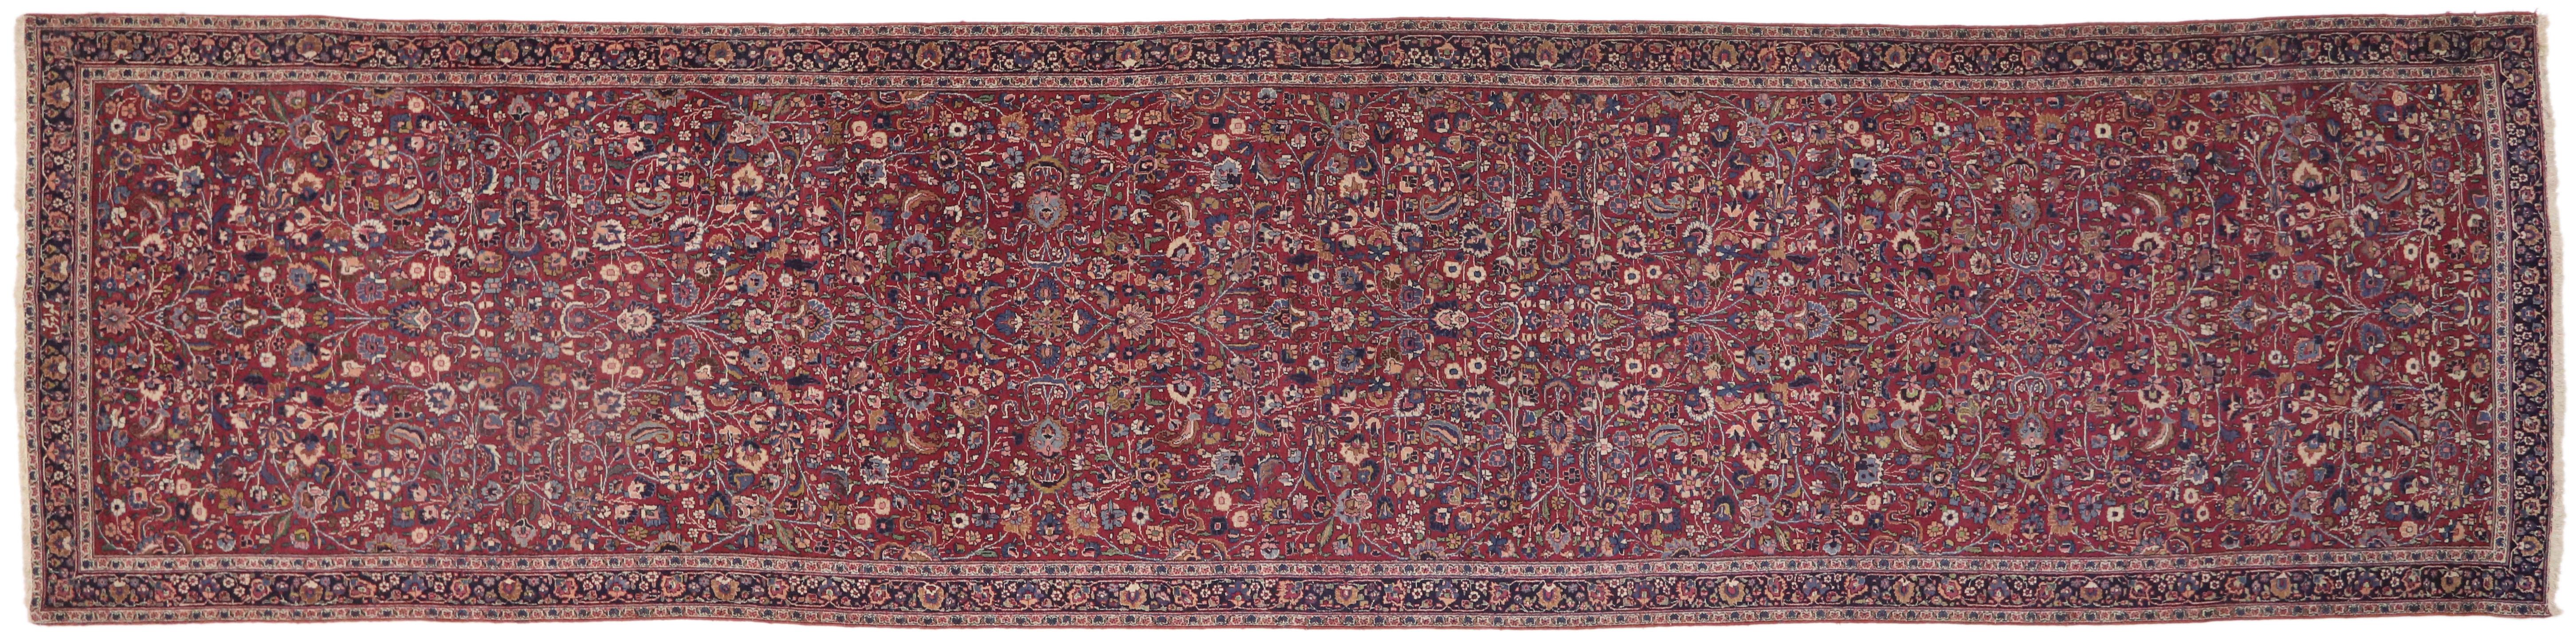 74287 Antique Persian Mashhad Runner with Old World Style, Extra Long Hallway Runner. Rich in color, texture and beguiling ambiance, this hand knotted wool antique Persian Mashhad rug runner beautifully displays timeless elegance and regal charm. A